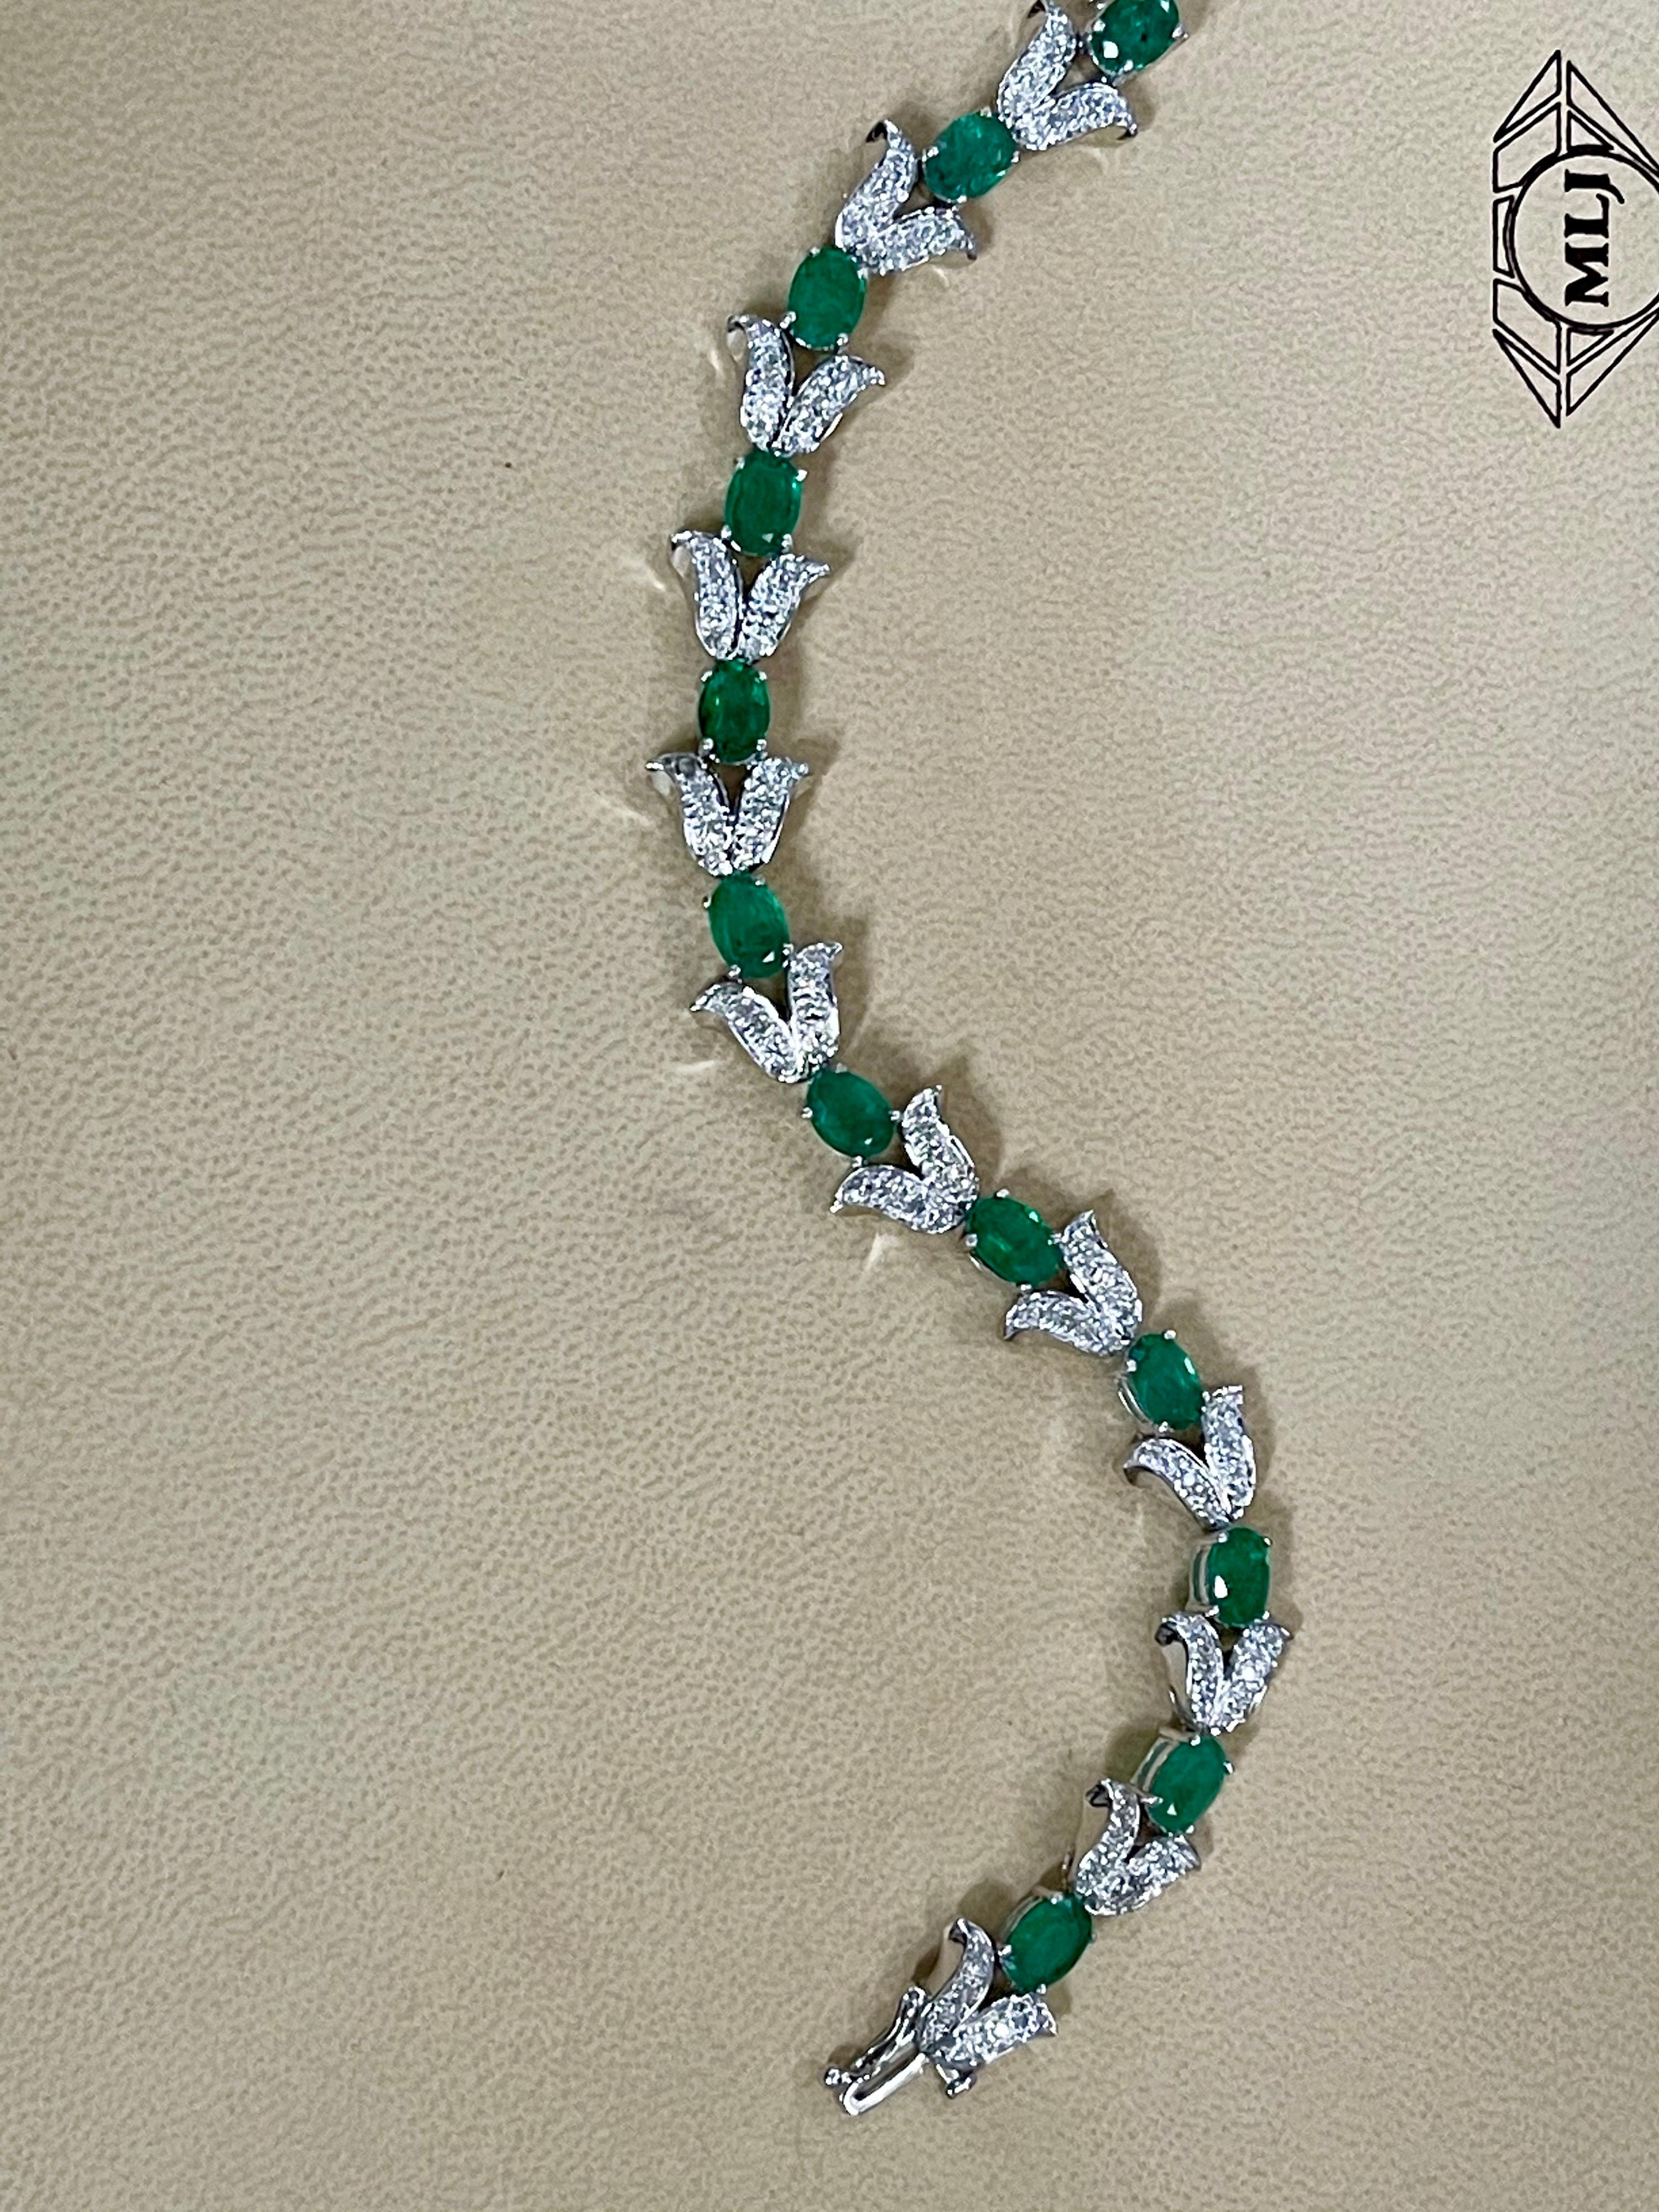 10 Carat Natural Brazilian Emerald & Diamond Tennis Bracelet 14 Karat White Gold In Excellent Condition For Sale In New York, NY